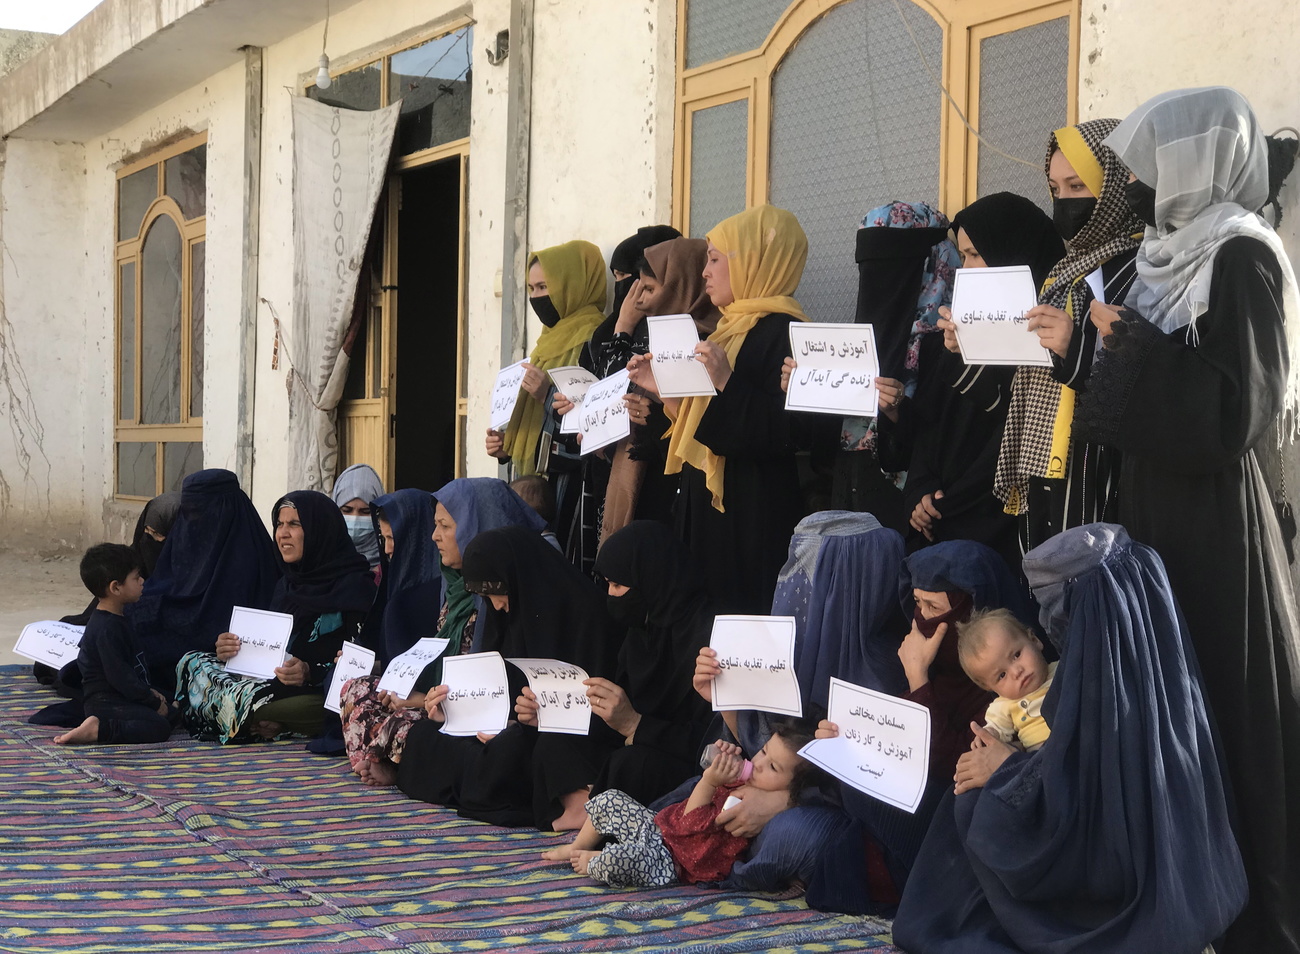 Afghan women and girls protesting against a ban on education and work.